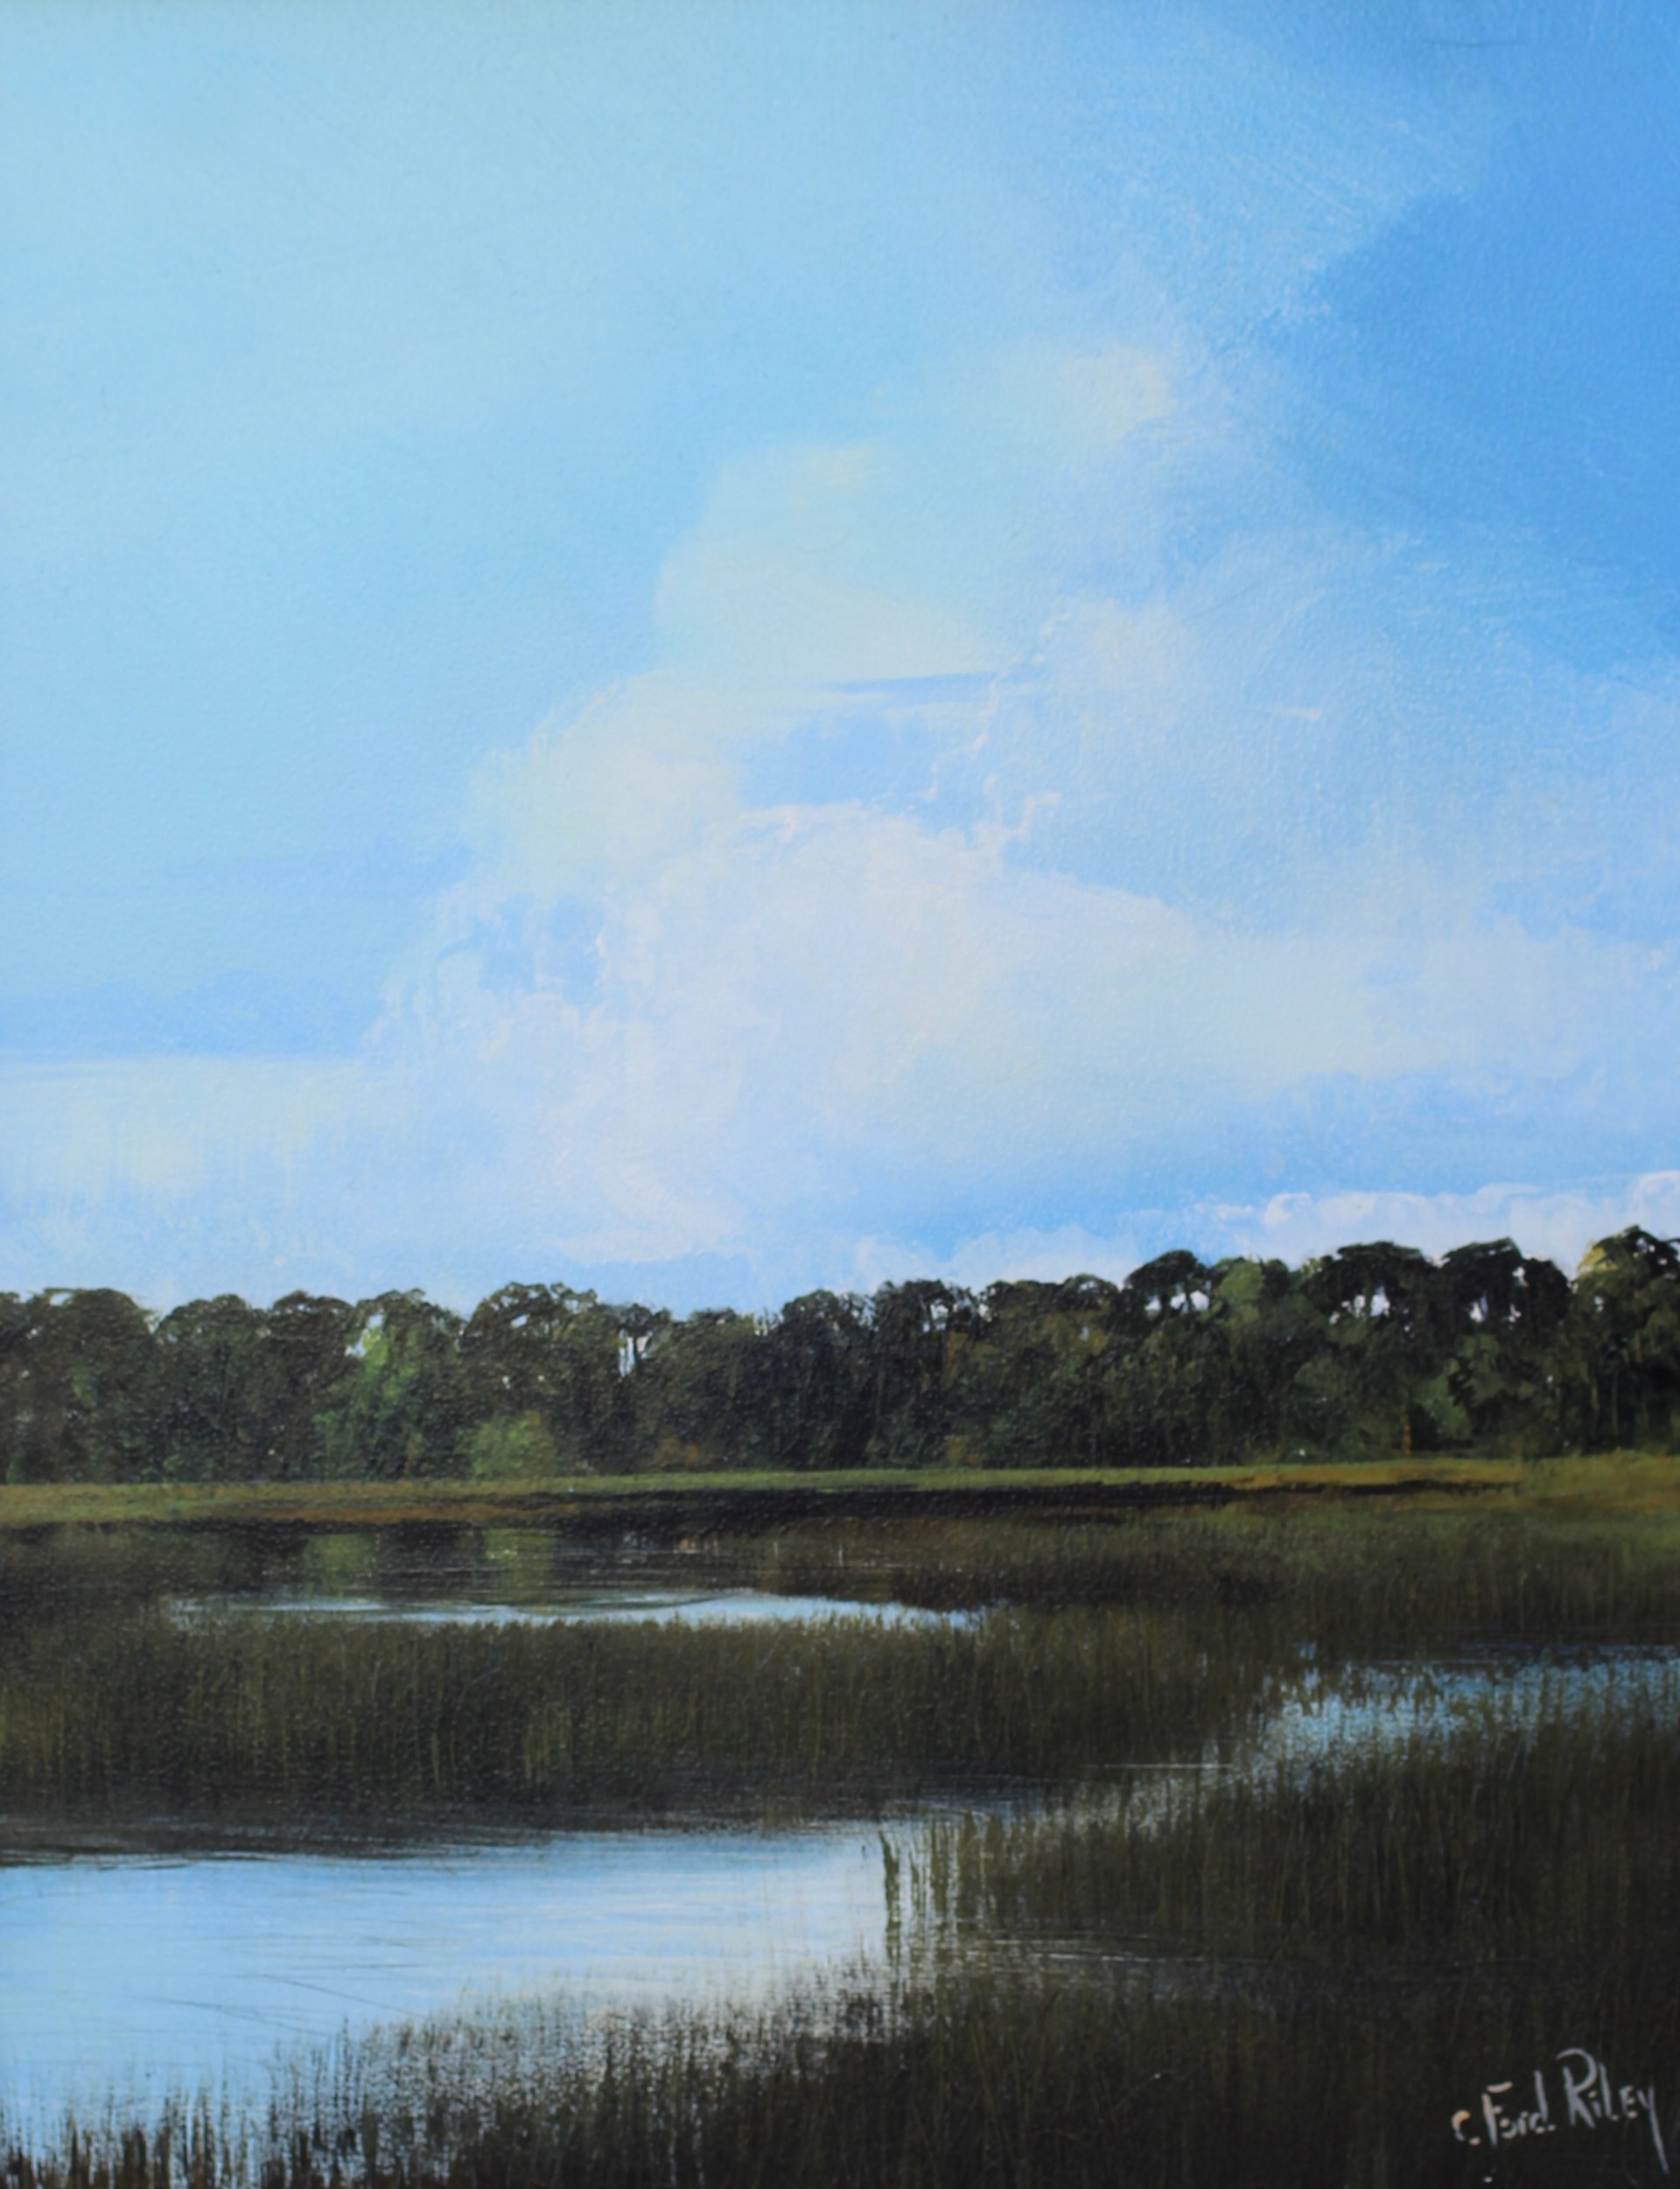 Myakka Marsh and Grasses by C. Ford Riley